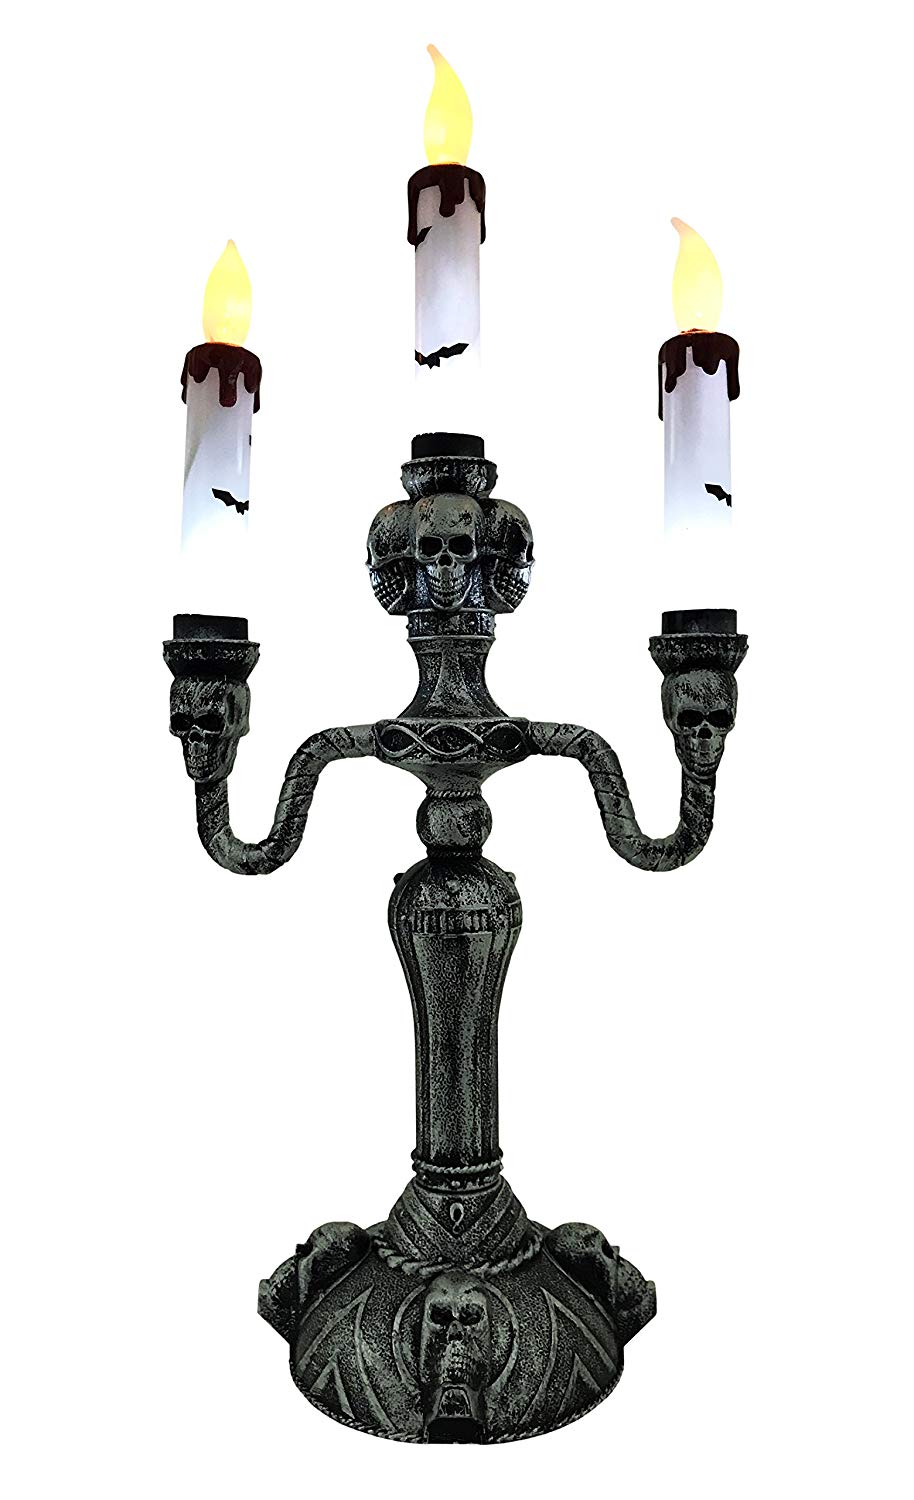 Candle Holders for Fireplace Mantel Best Of Kinrex Led Candelabra Halloween Decoration Candelabra Plastic Indoor Party Decor Measures 15 5 Inches